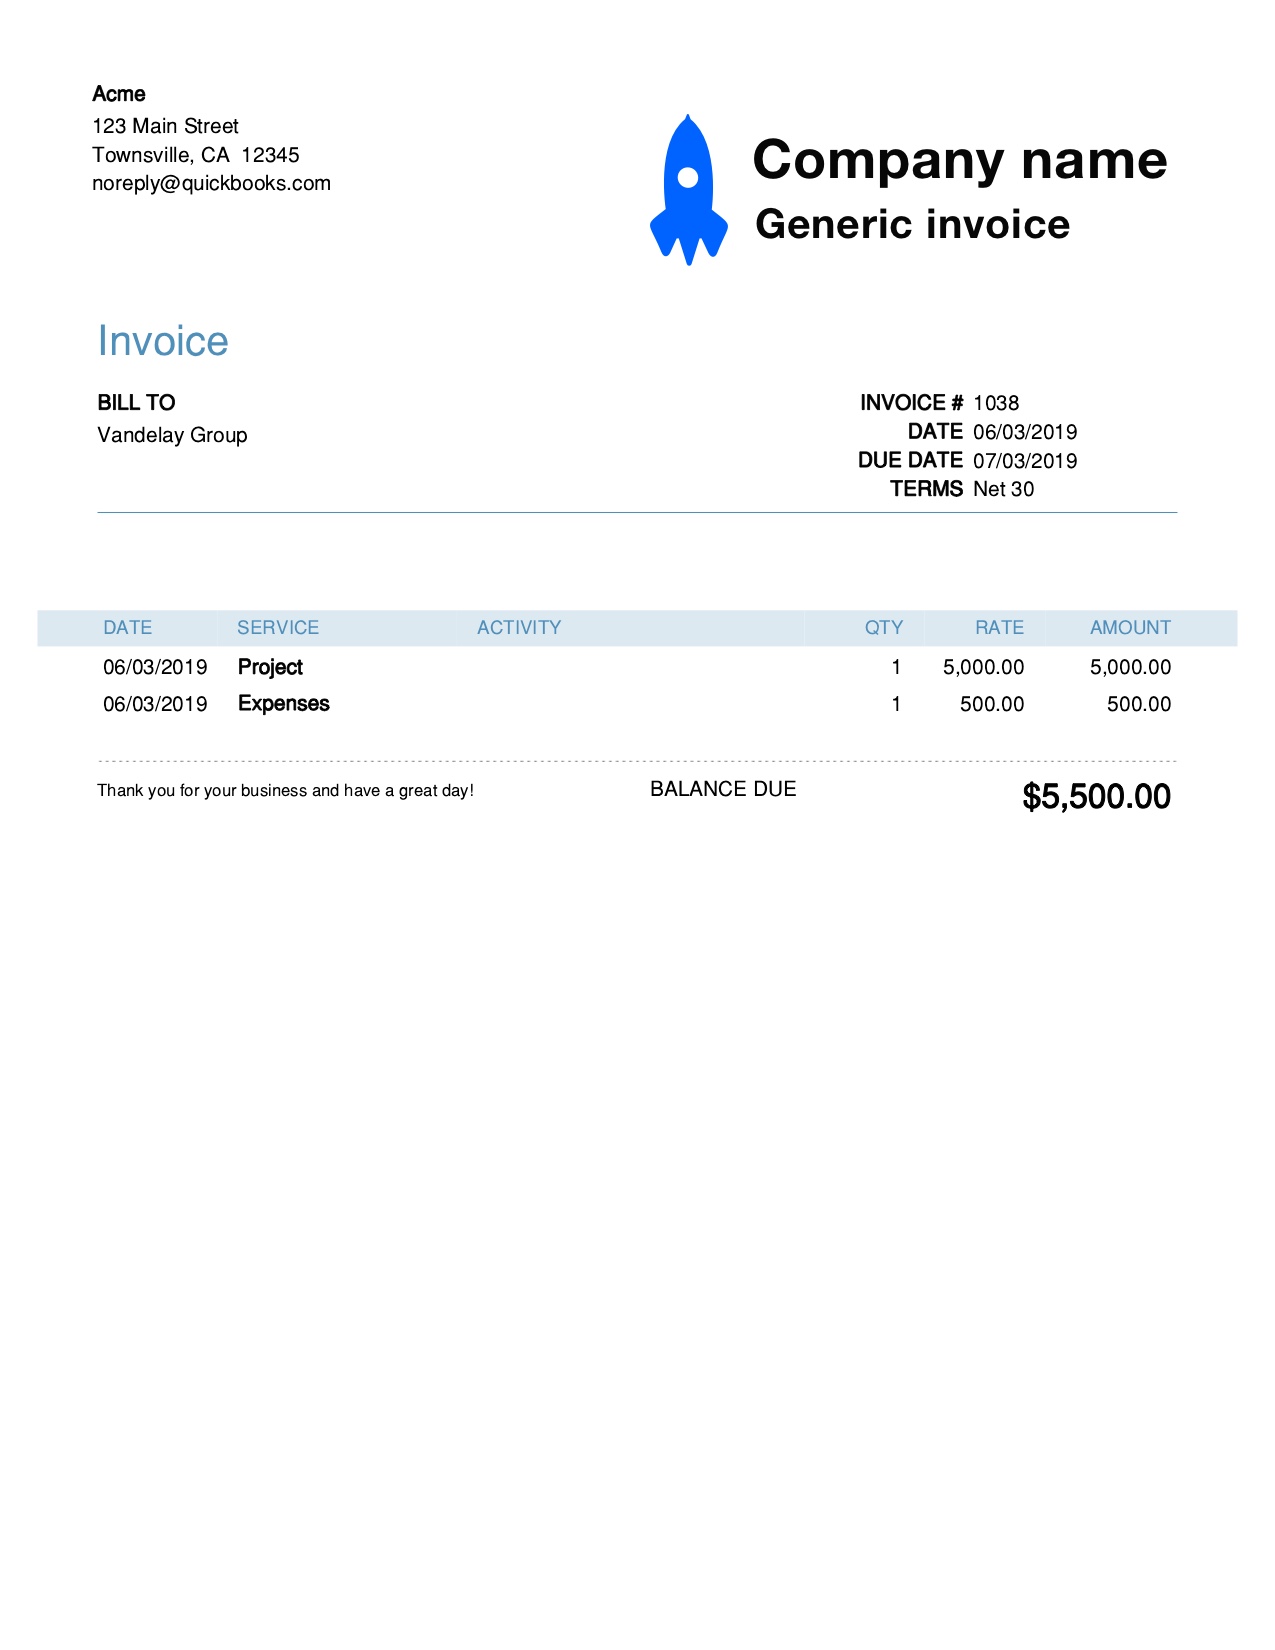 Free Generic Invoice Template. Customize and Send in 90 Seconds